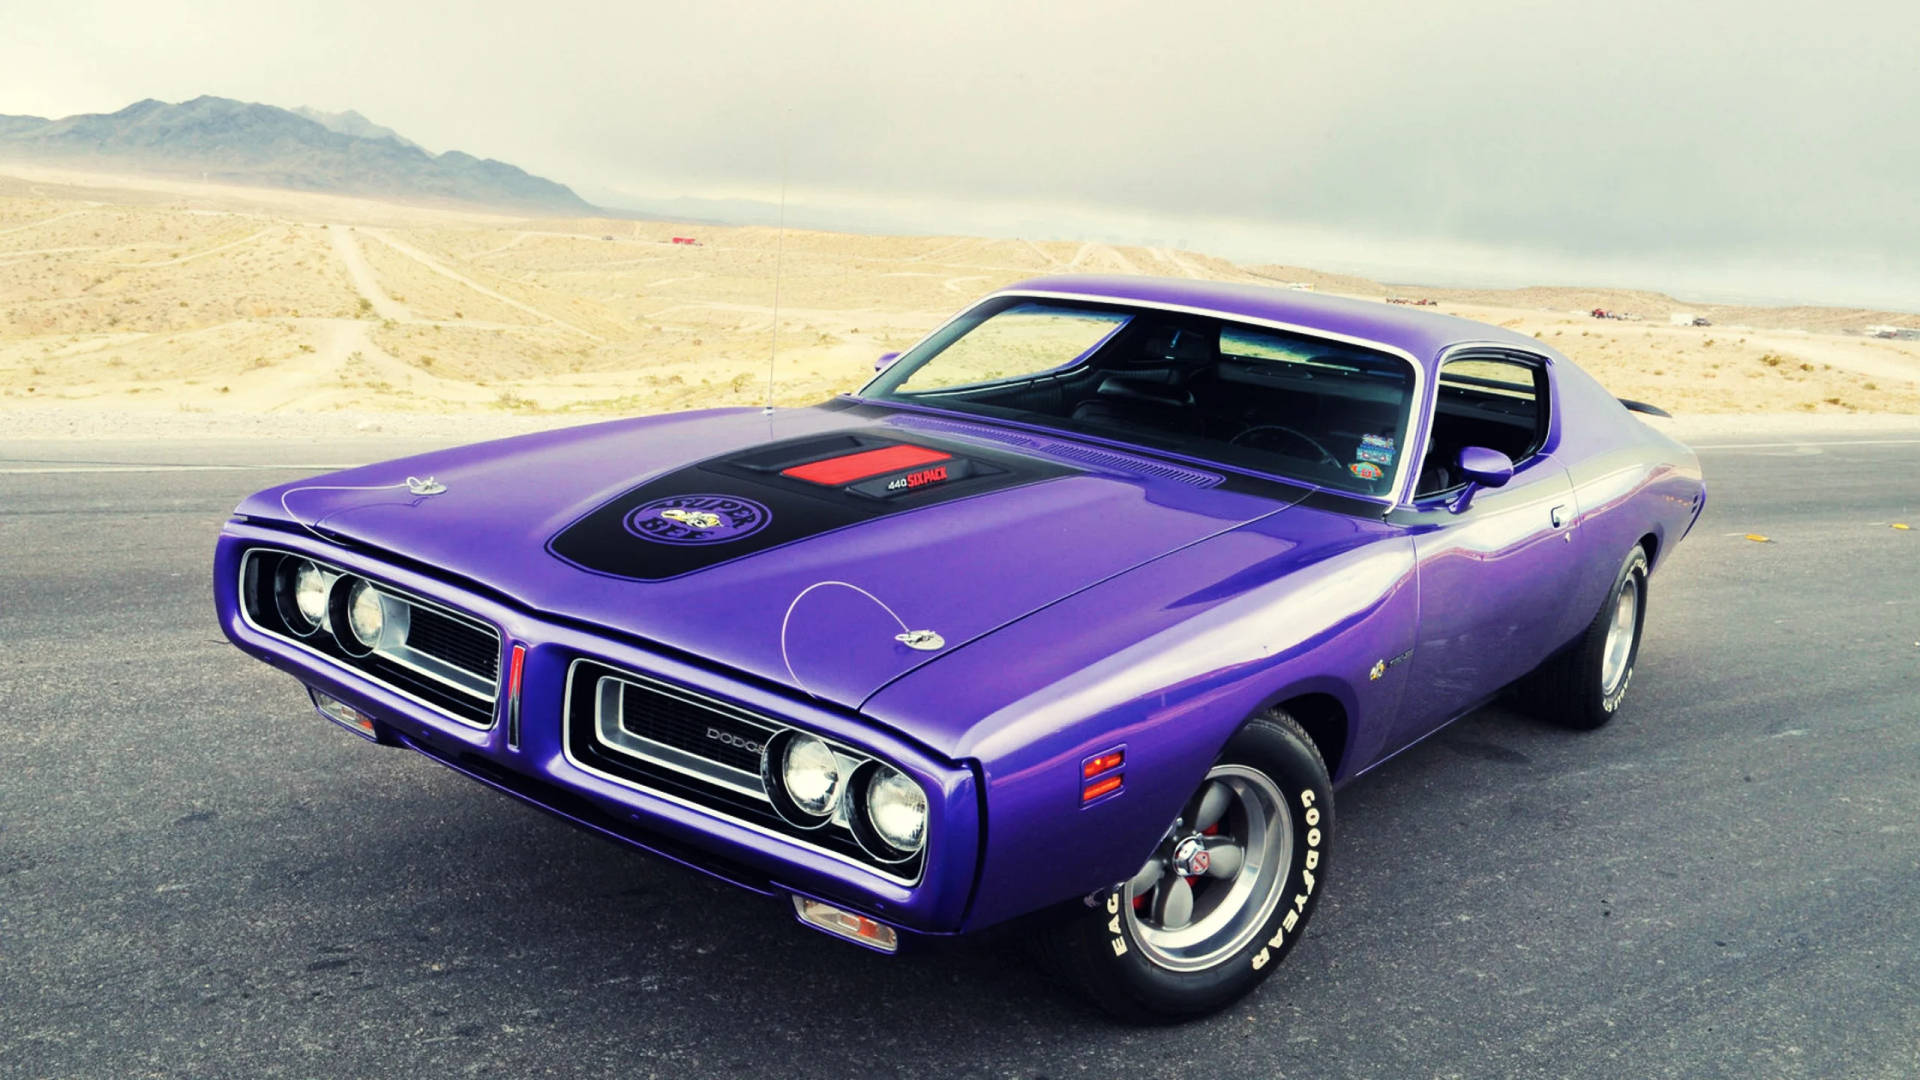 2560 X 1440 Car 1971 Ford Dodge Charger Superbee Picture